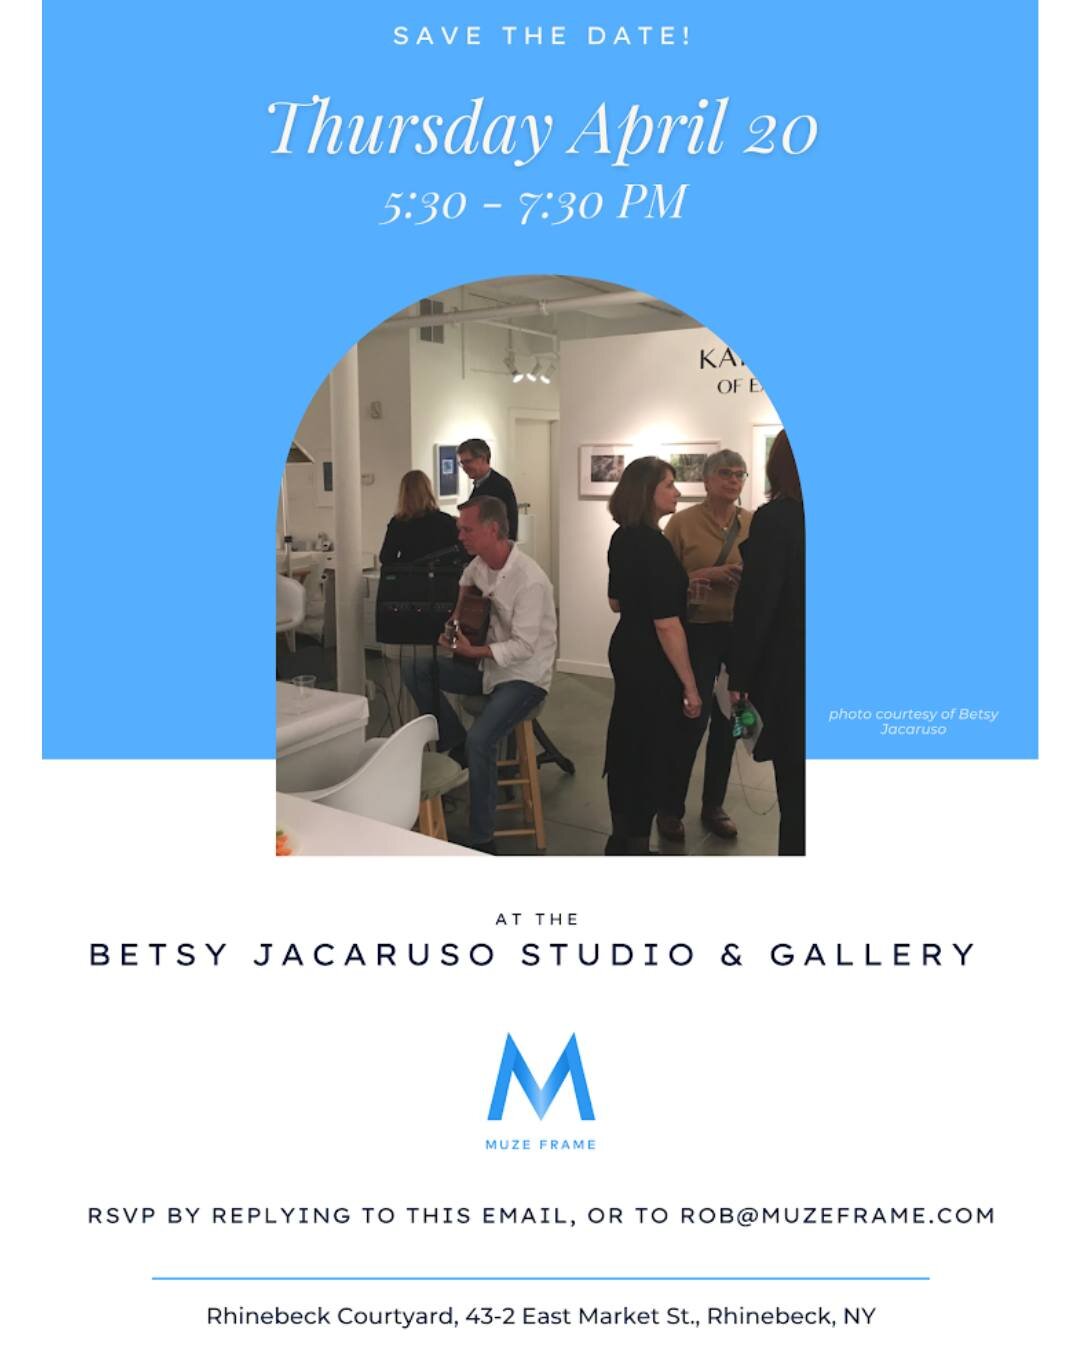 We&rsquo;re thrilled to be hosting the Muze Frame App Event, taking place Thursday April 20, 2023 from 5:30 - 7:30 pm at our gallery. Robert Gukeisen, the creator of the App, will be introducing us all to the new exciting features of his creation. If